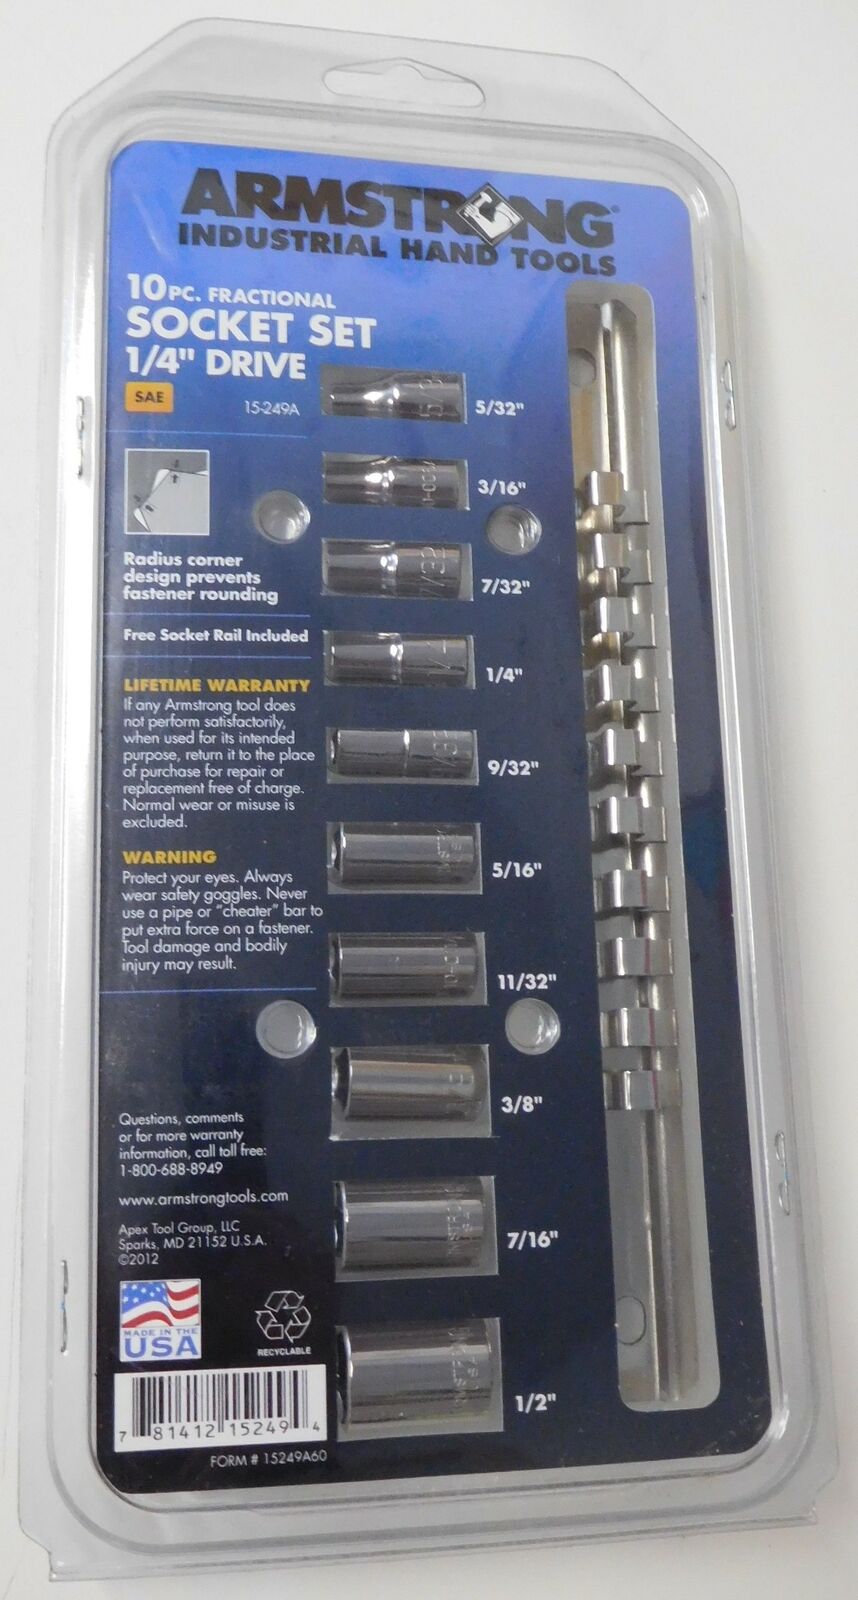 Armstrong 15-249A 10 Piece Fractional 1/4" Drive 6 Point Socket Set USA